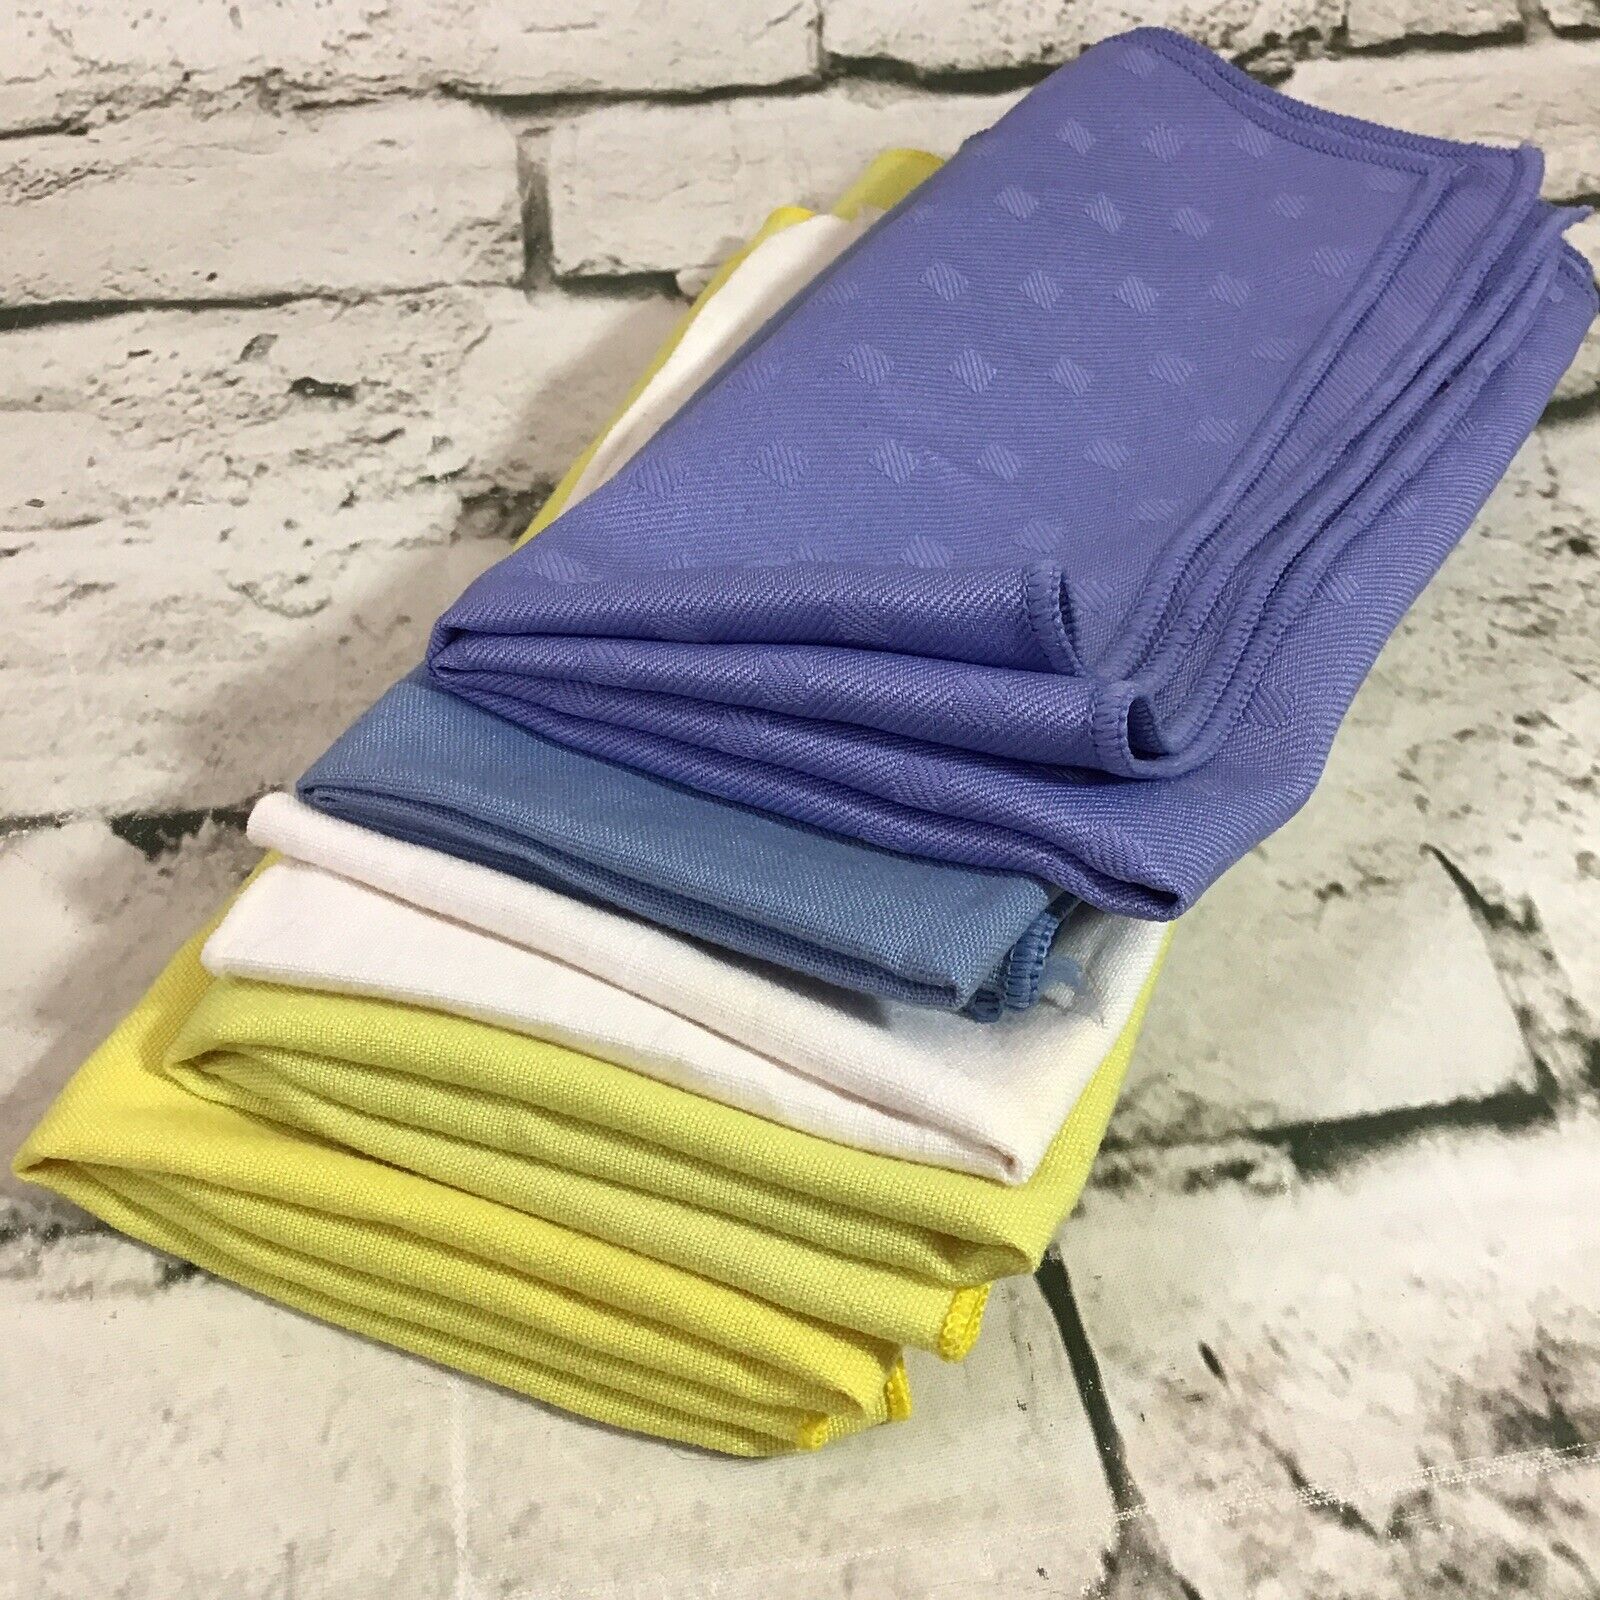 Vintage Cloth Napkins Lot Of 5 Assorted Blue Yellow White Tabletop Decor Flaw